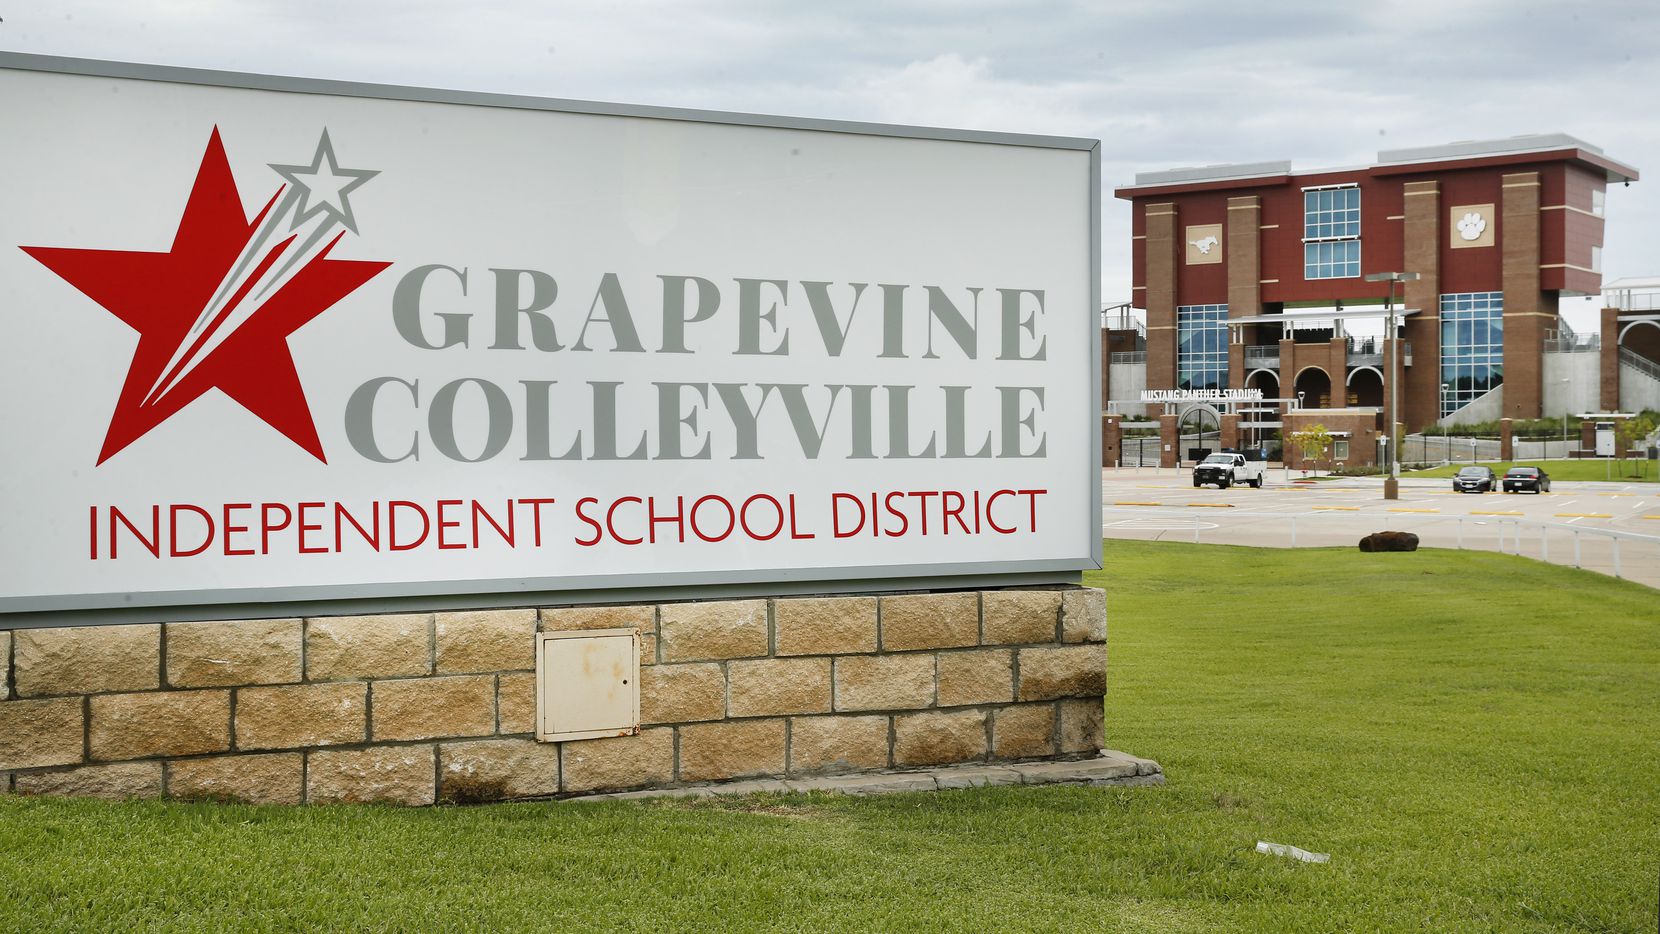 Grapevine-Colleyville ISD is offering free meals this summer. (Tom Fox/The Dallas Morning News)